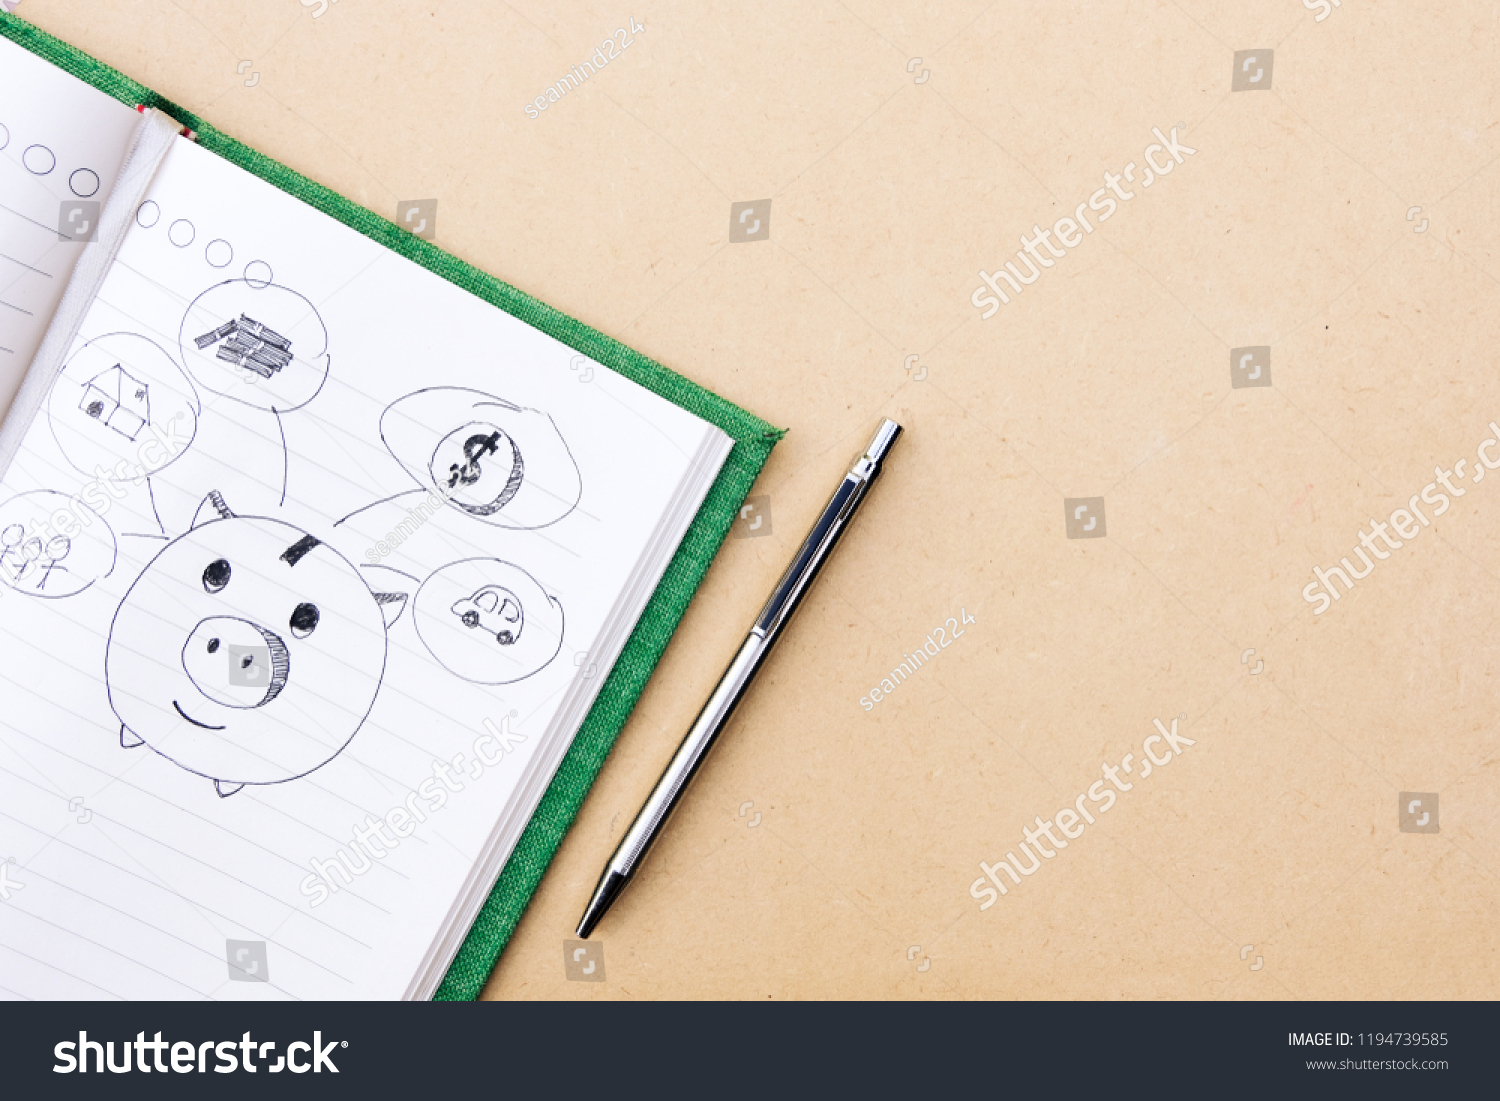 Drawn sketchy piggy bank and money related icons on lined notebook paper background. Save and investment money for prepare in the future - concept of saving money. #1194739585